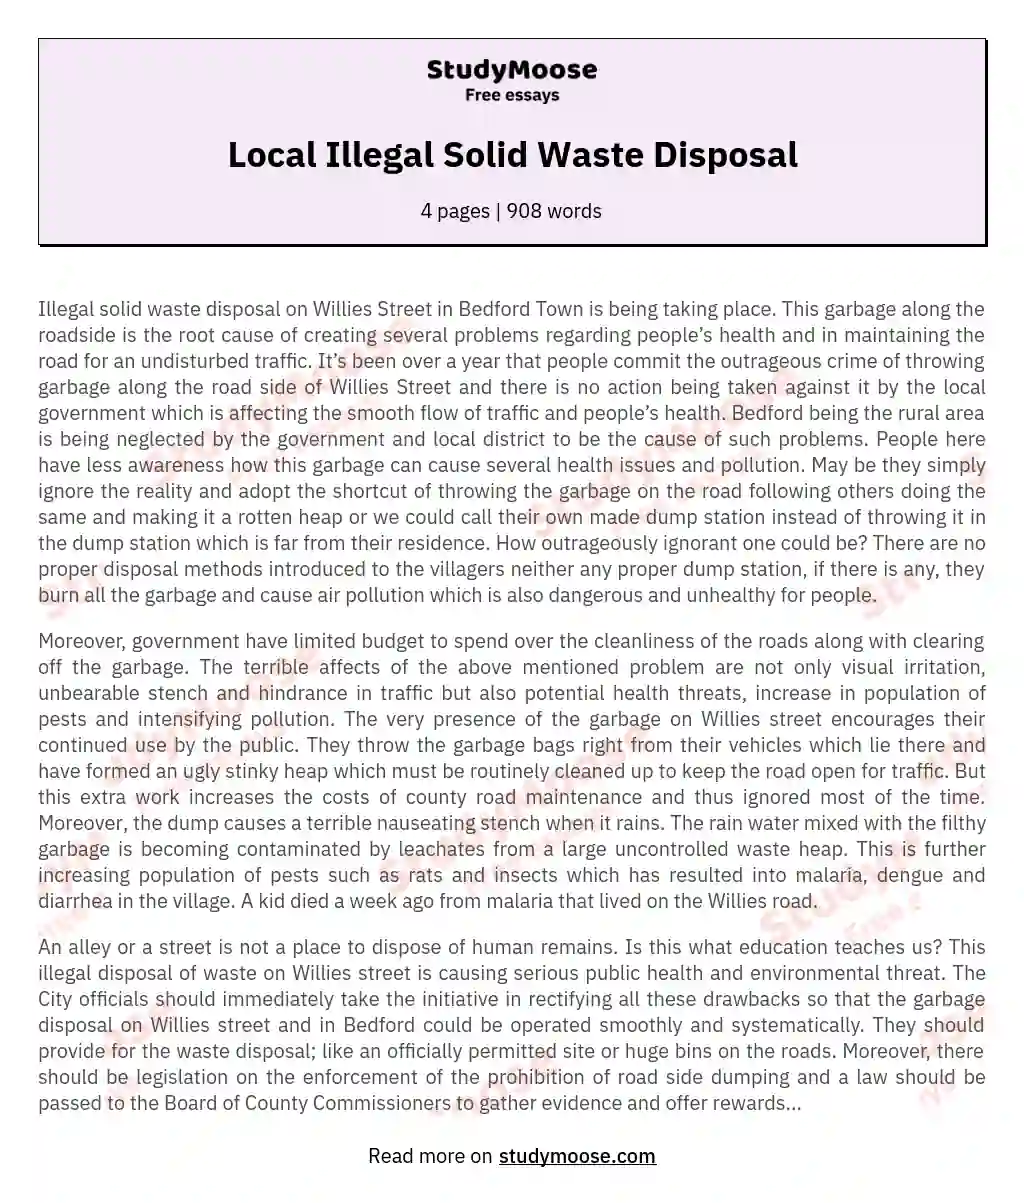 Local Illegal Solid Waste Disposal